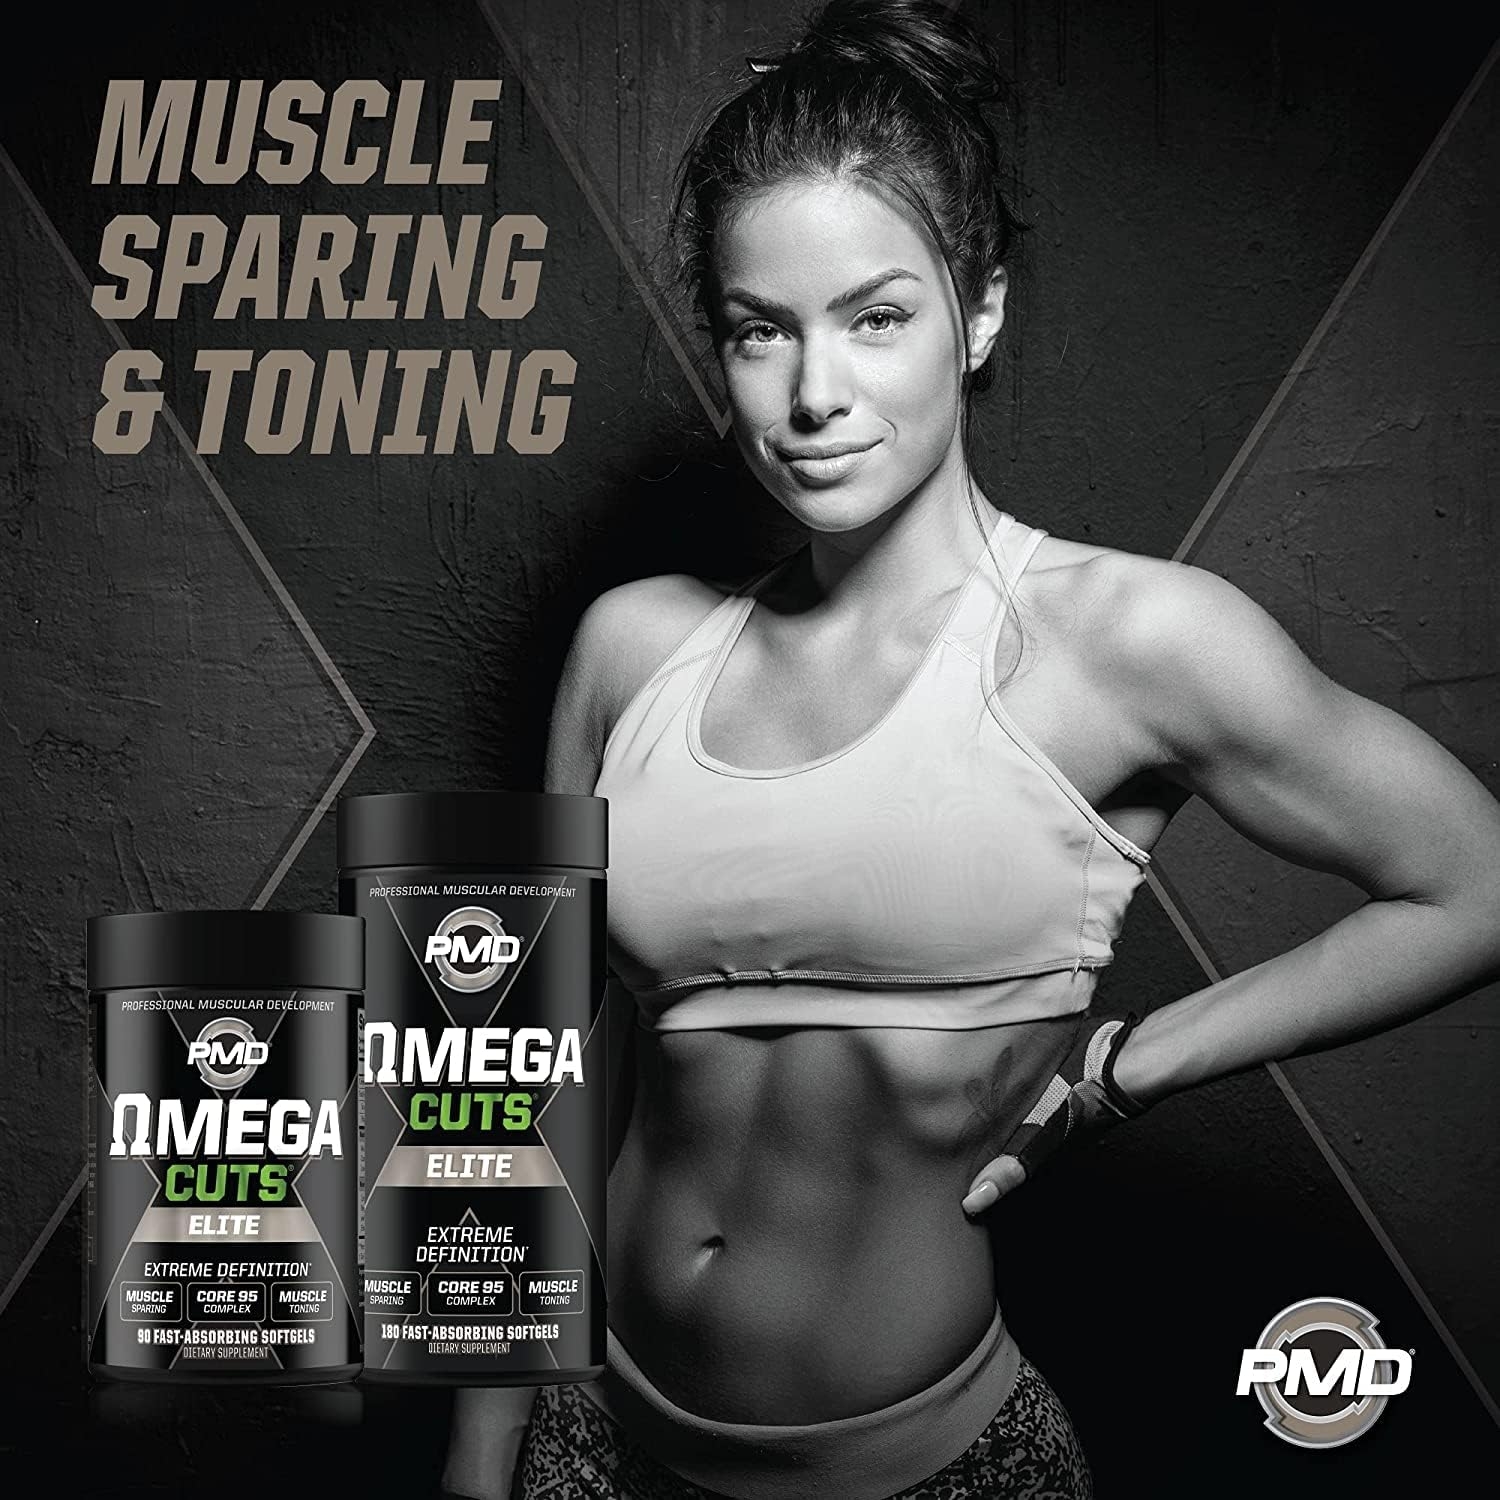 PMD Sports Omega Cuts Elite Fat Loss-Muscle Defining Formula - Omega Fatty Acids, MCT's and CLA for Muscle Definition and Maintenance - Keto Friendly for Women and Men - Stimulant Free (90 Softgels)